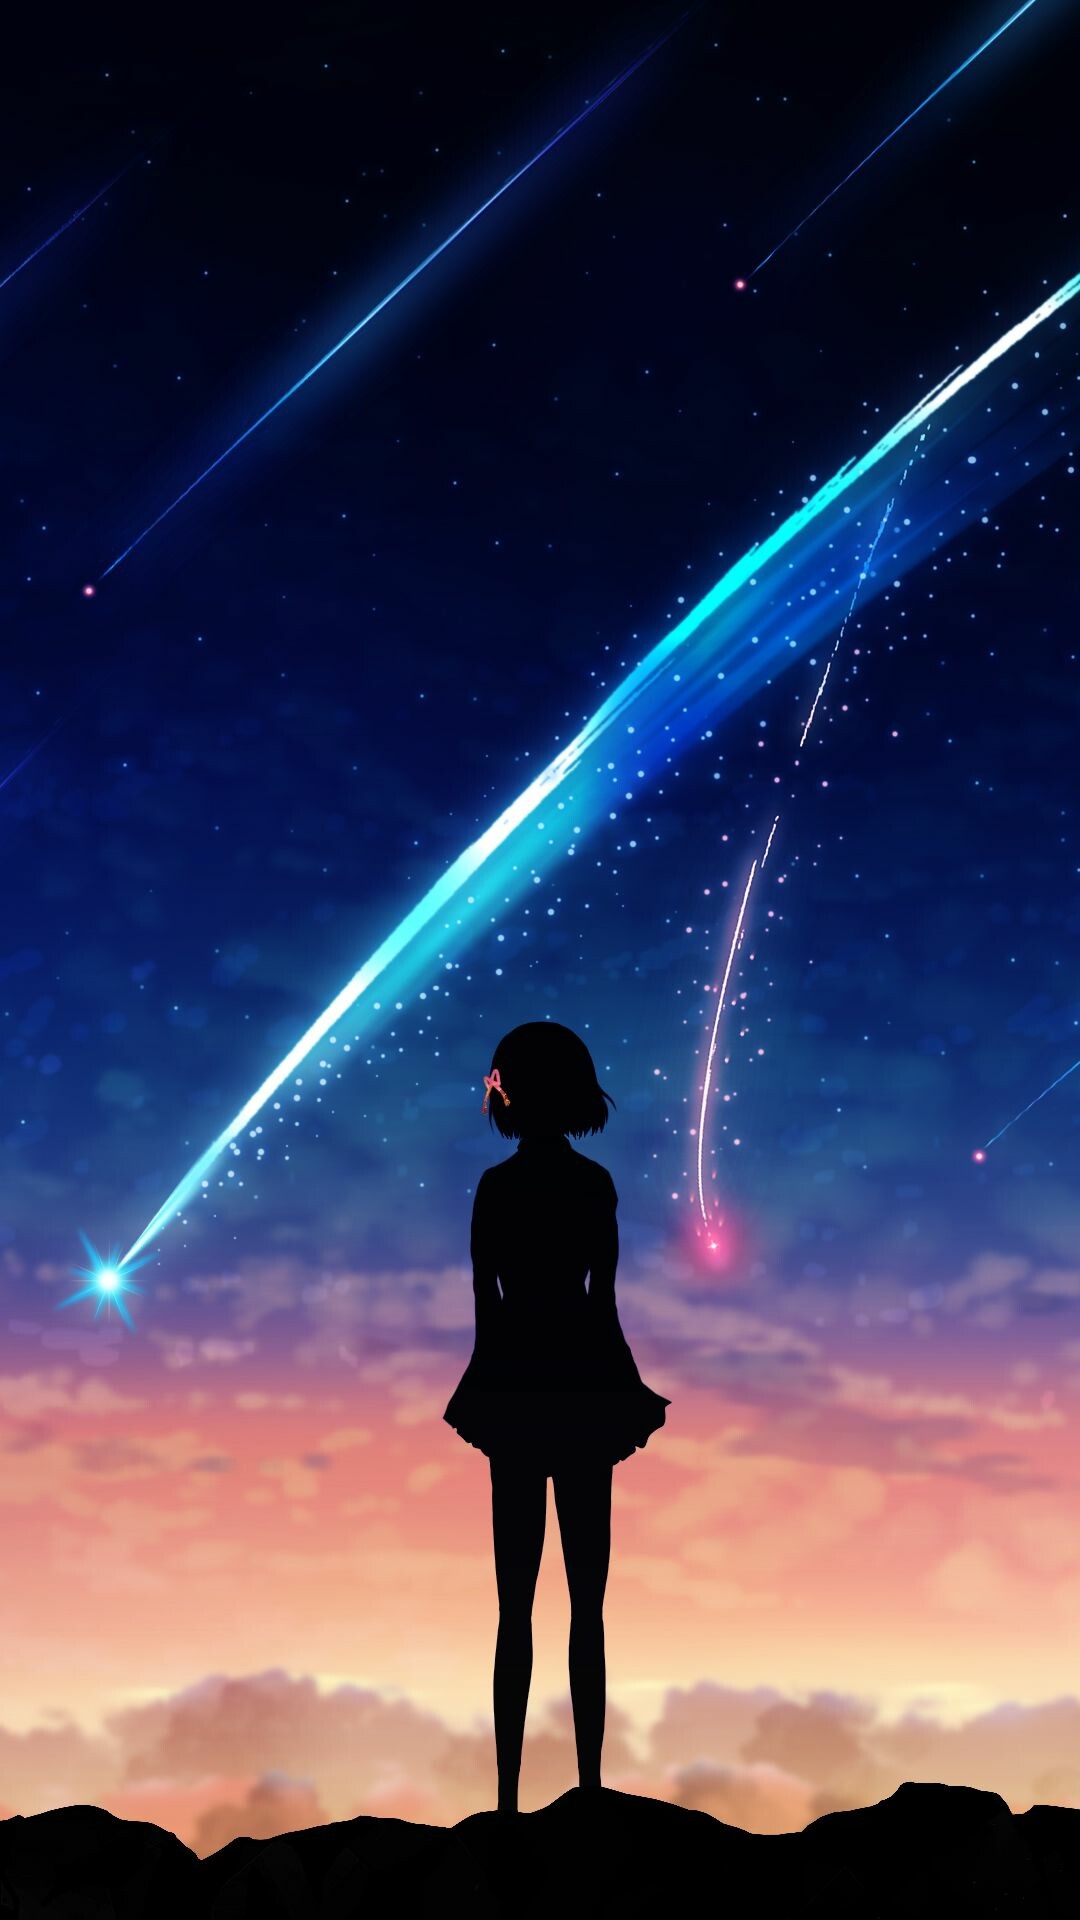 50+ Your Name Anime Wallpapers: HD, 4K, 5K for PC and Mobile | Download  free images for iPhone, Android